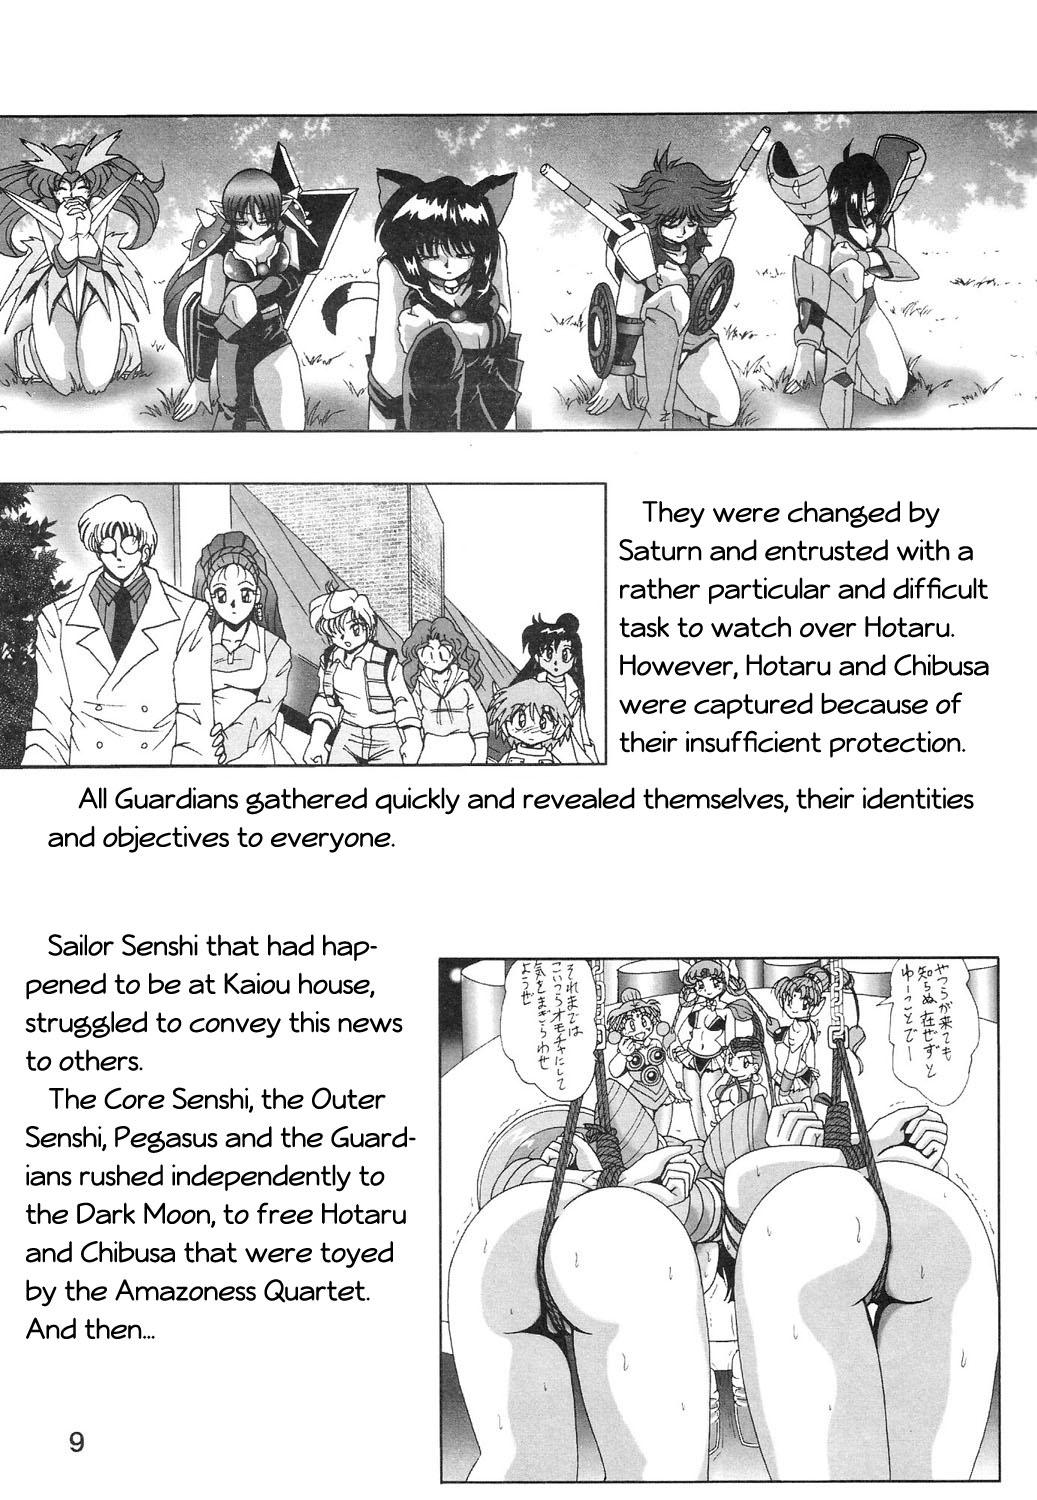 Price Silent Saturn SS vol. 8 - Sailor moon Phat - Page 8